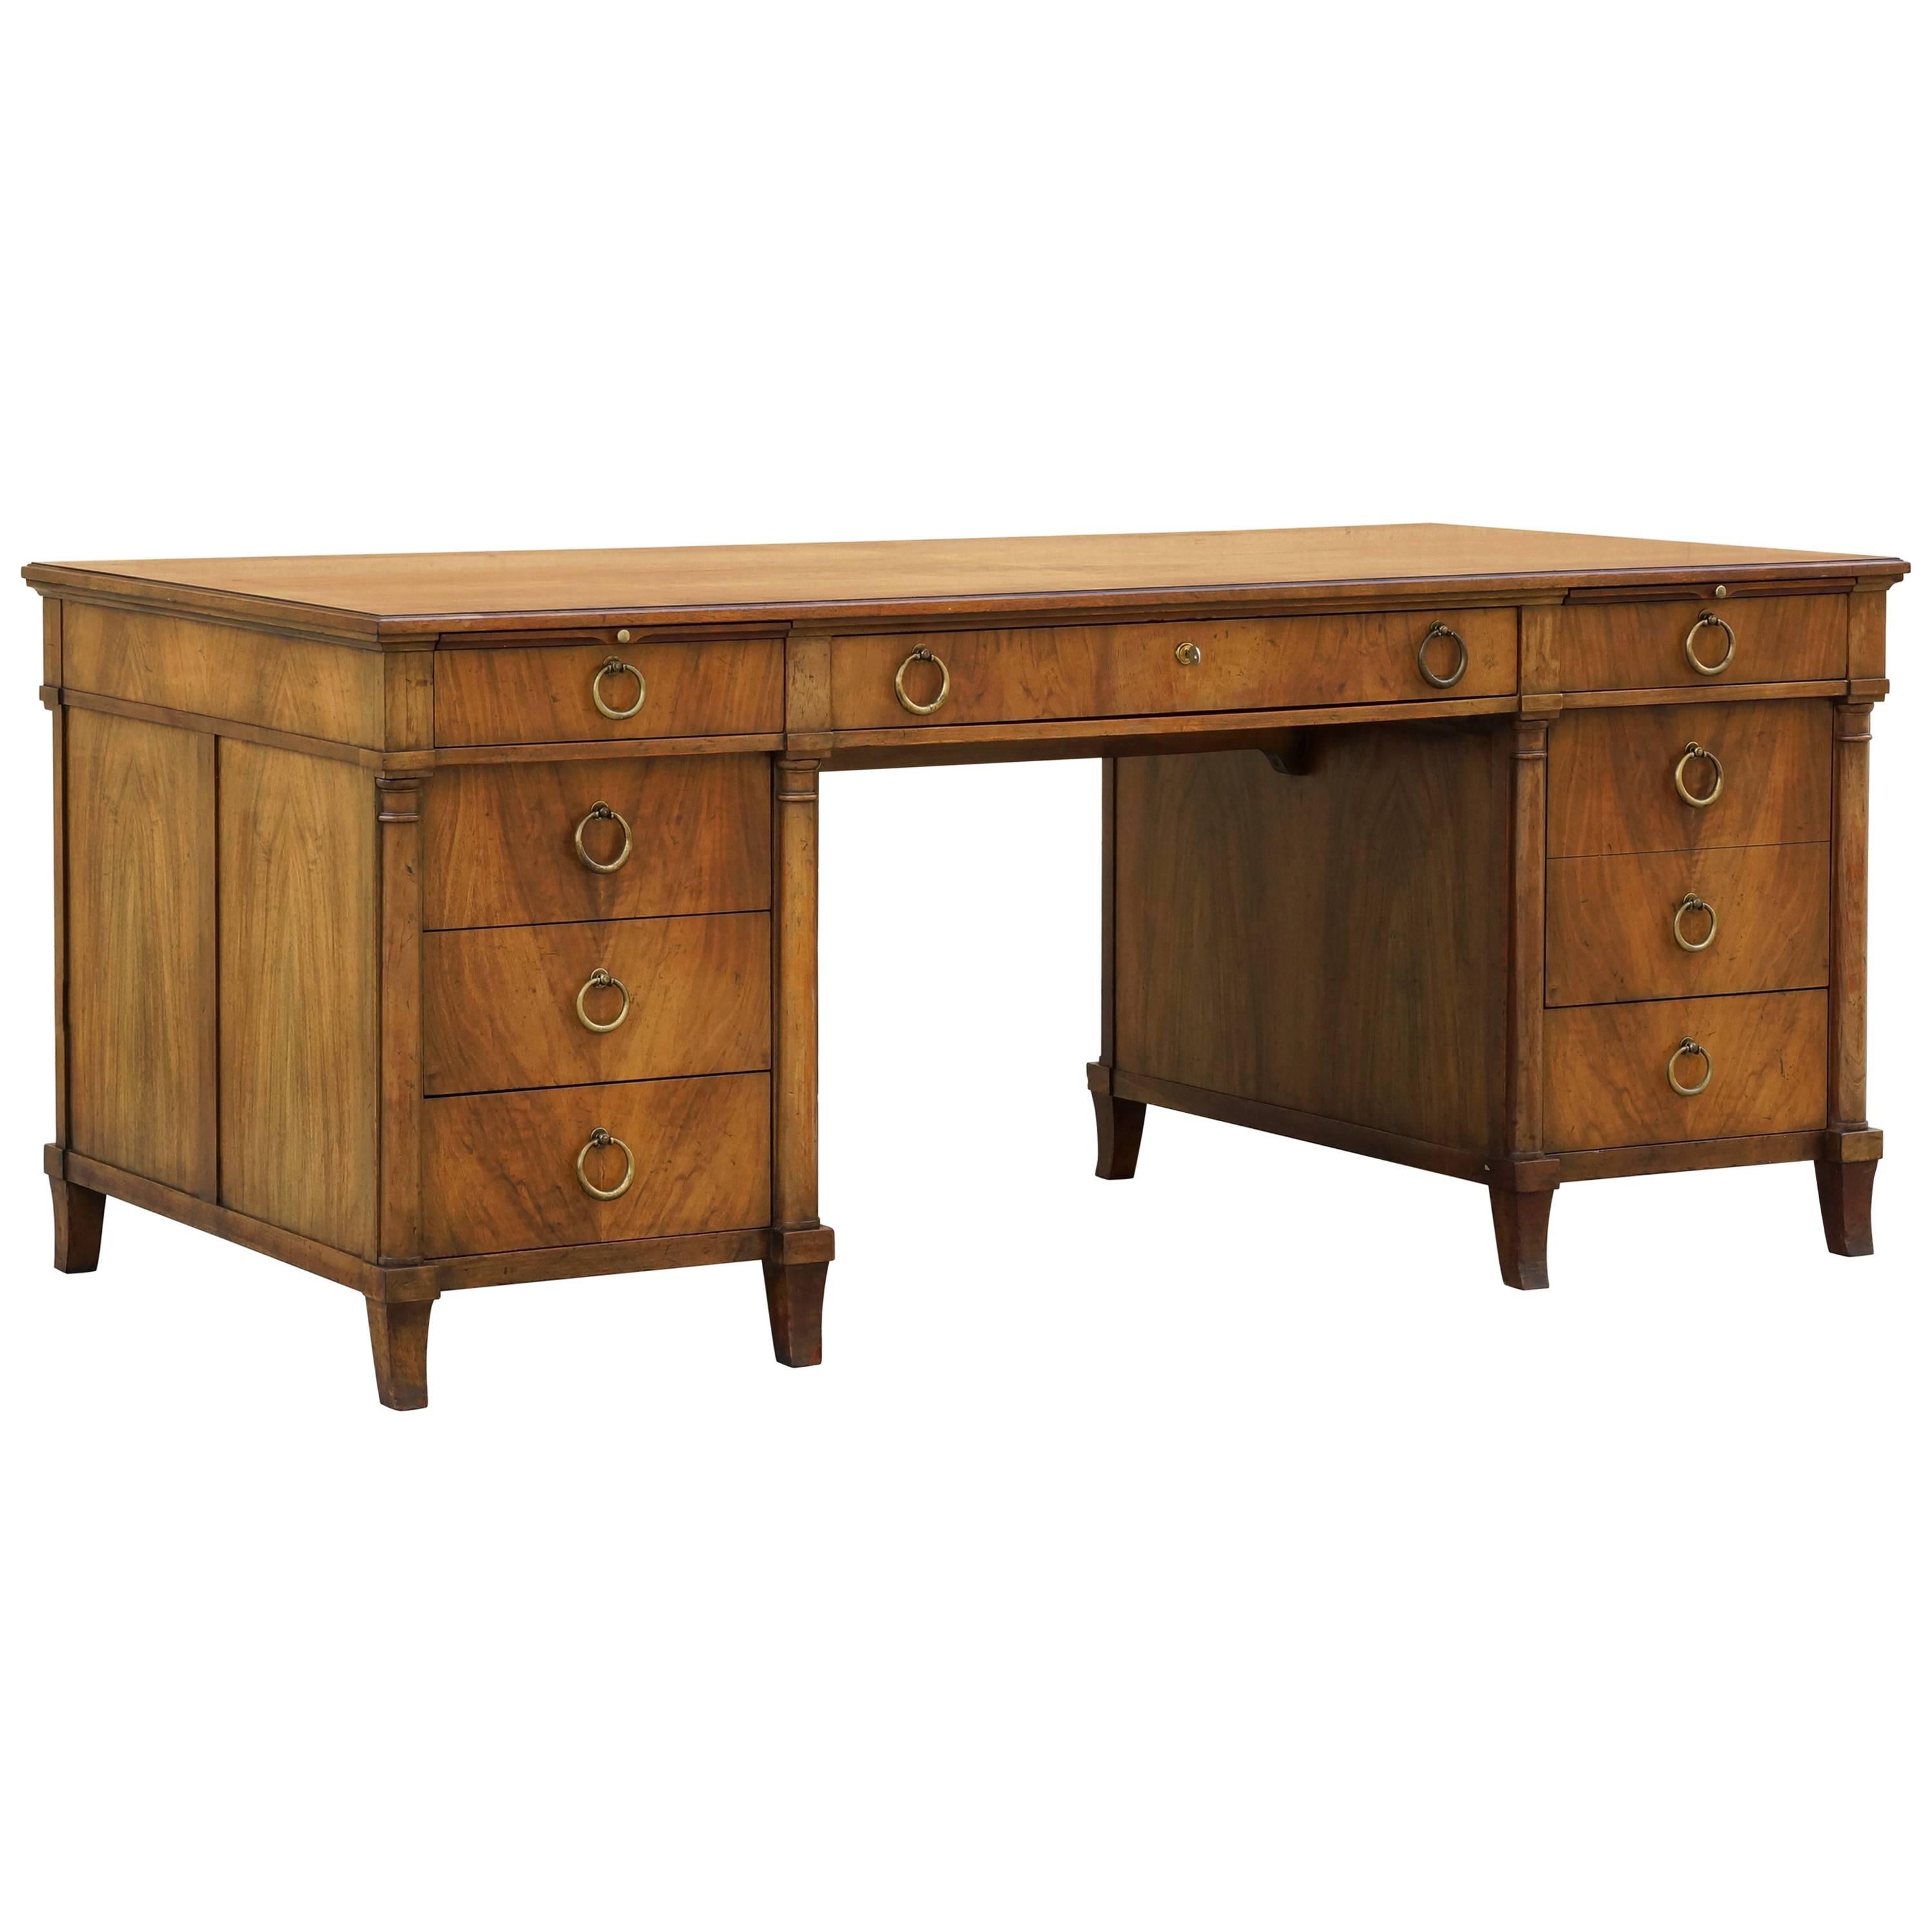 Stately Executive Desk in Solid Walnut by Baker